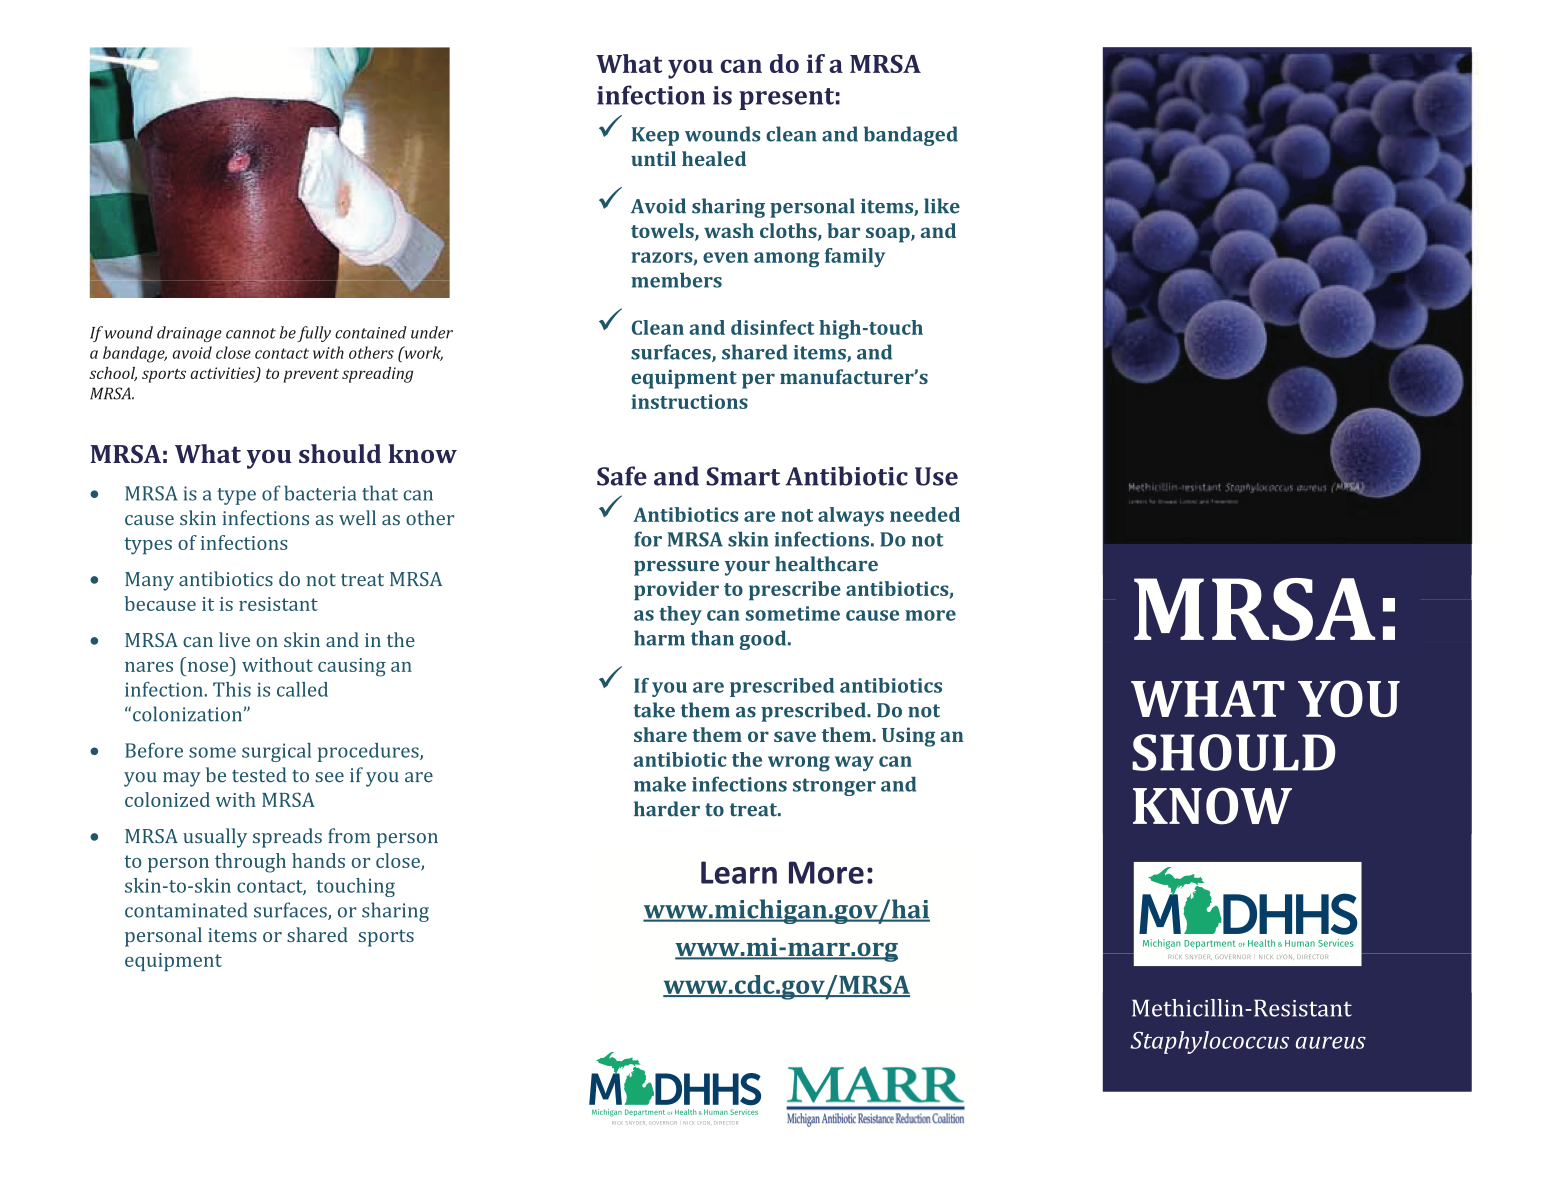 MRSA what you should know brochure